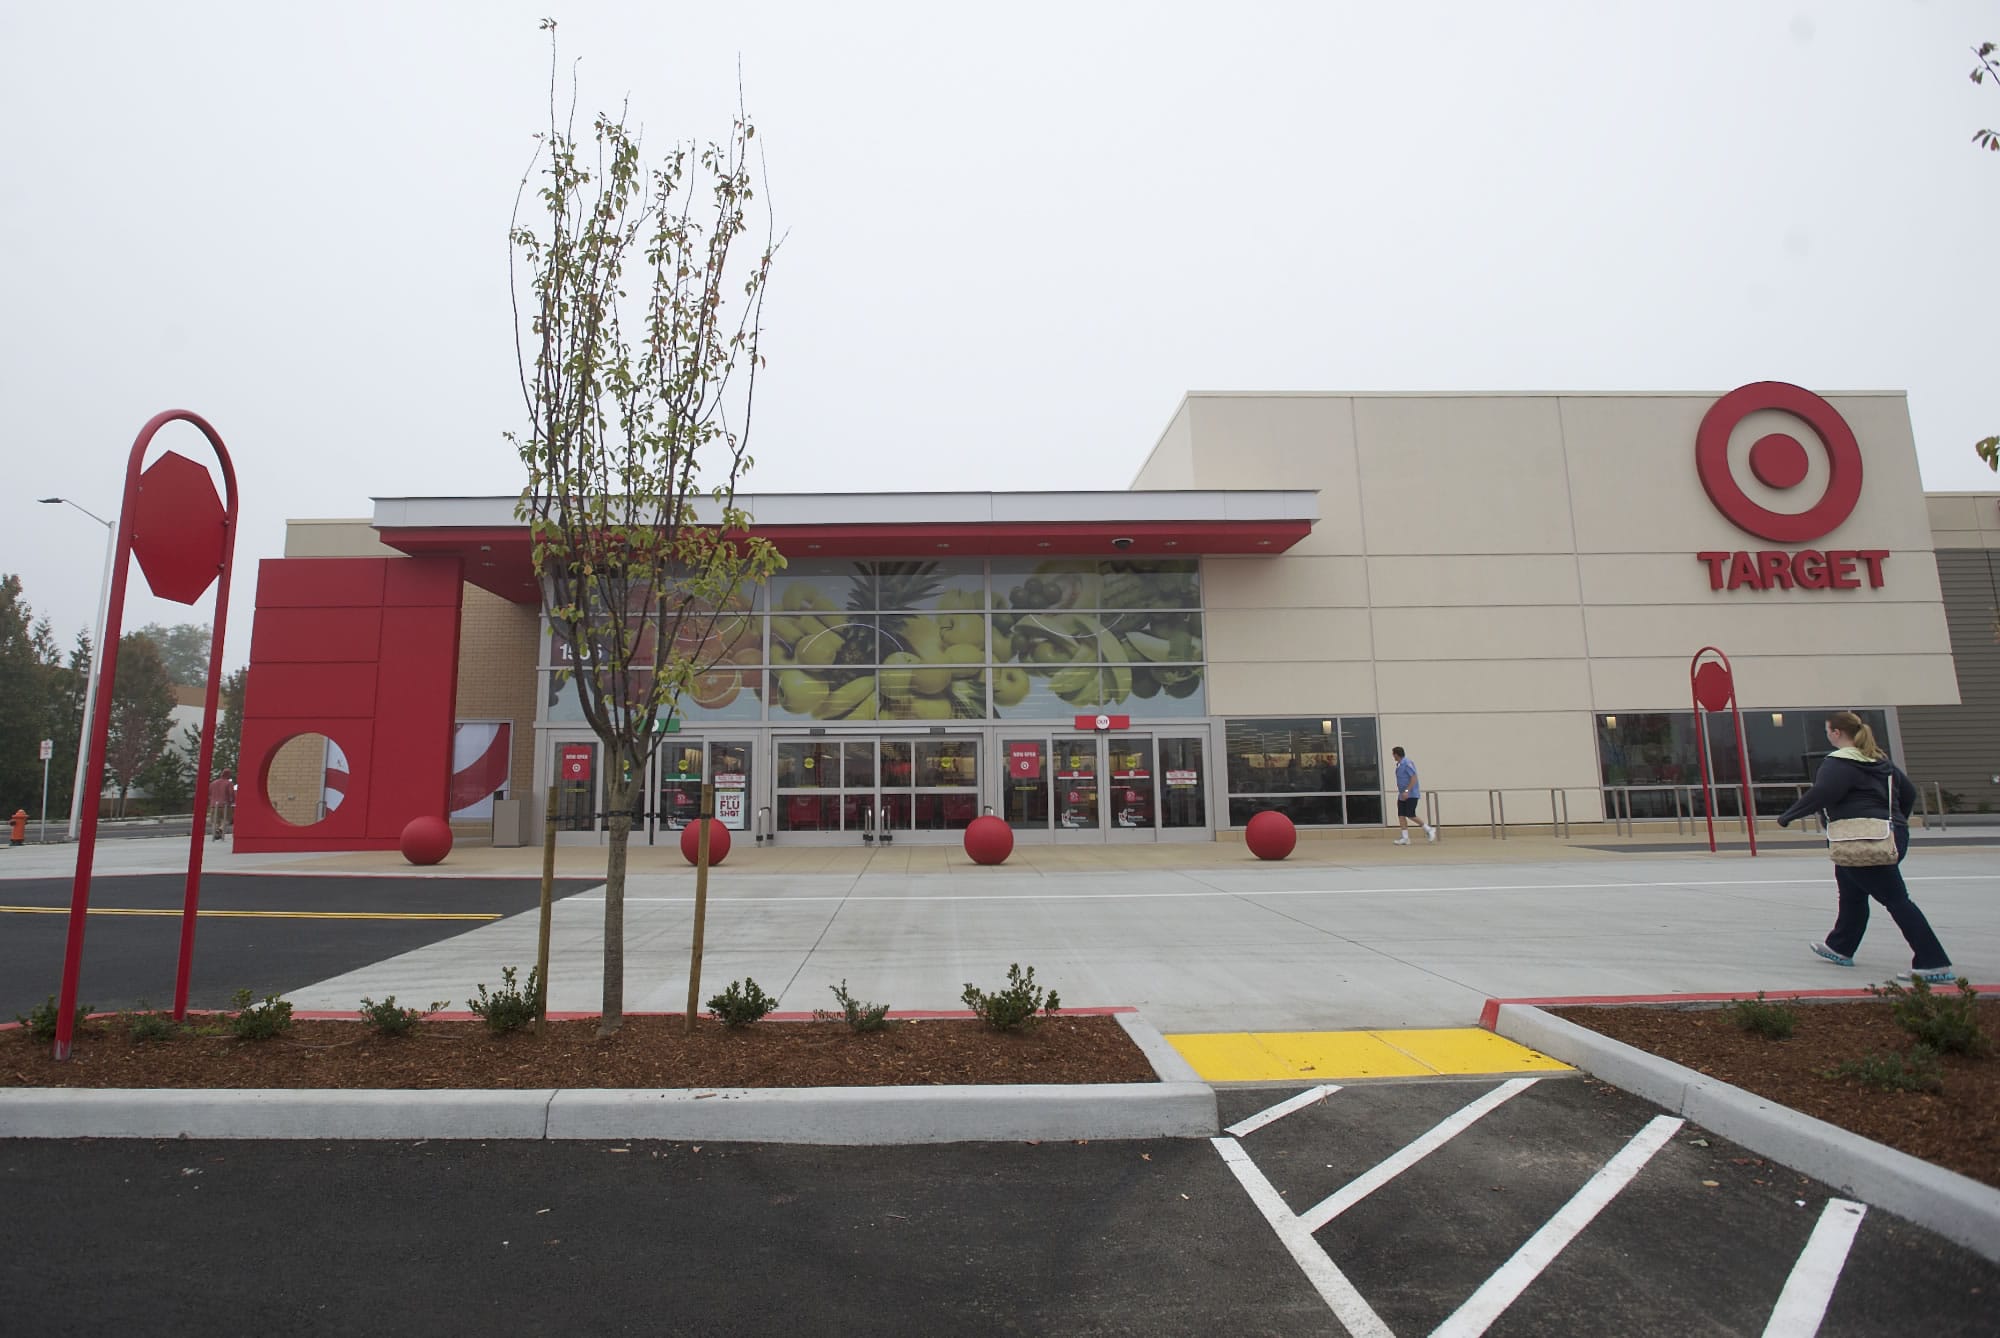 Shoppers check out the new Target store now open at the Jantzen Beach Center.